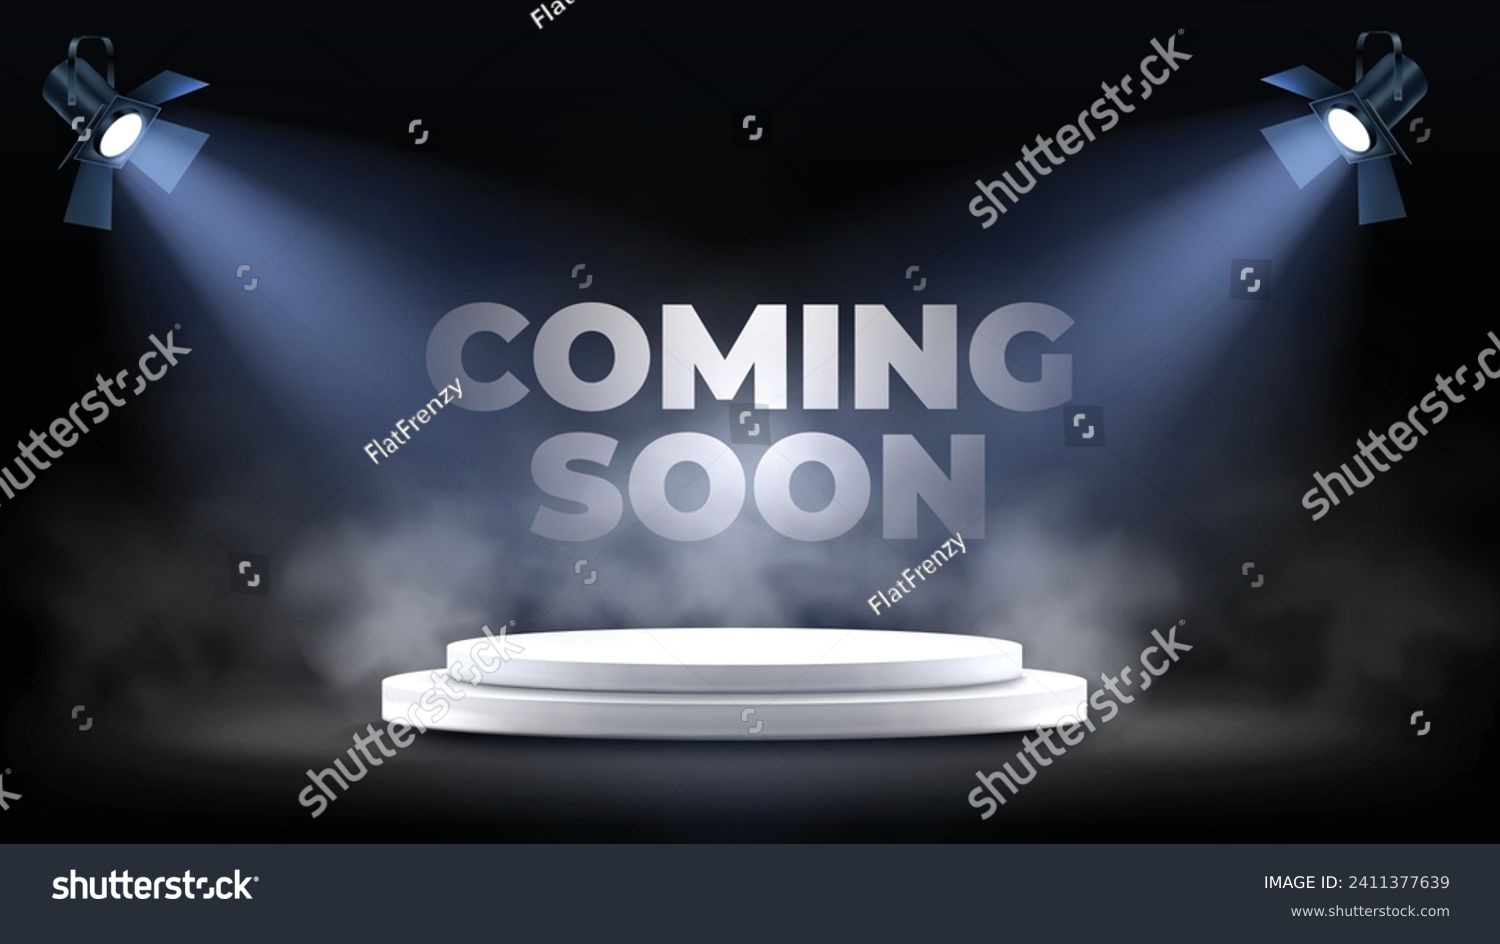 SVG of Unveiling Innovation: A Stage Illuminated for the Future. Lights, Camera, Mystery! A Spotlight Shines on the Next Big Thing! Get ready for the future with our sleek and modern Coming Soon design. svg